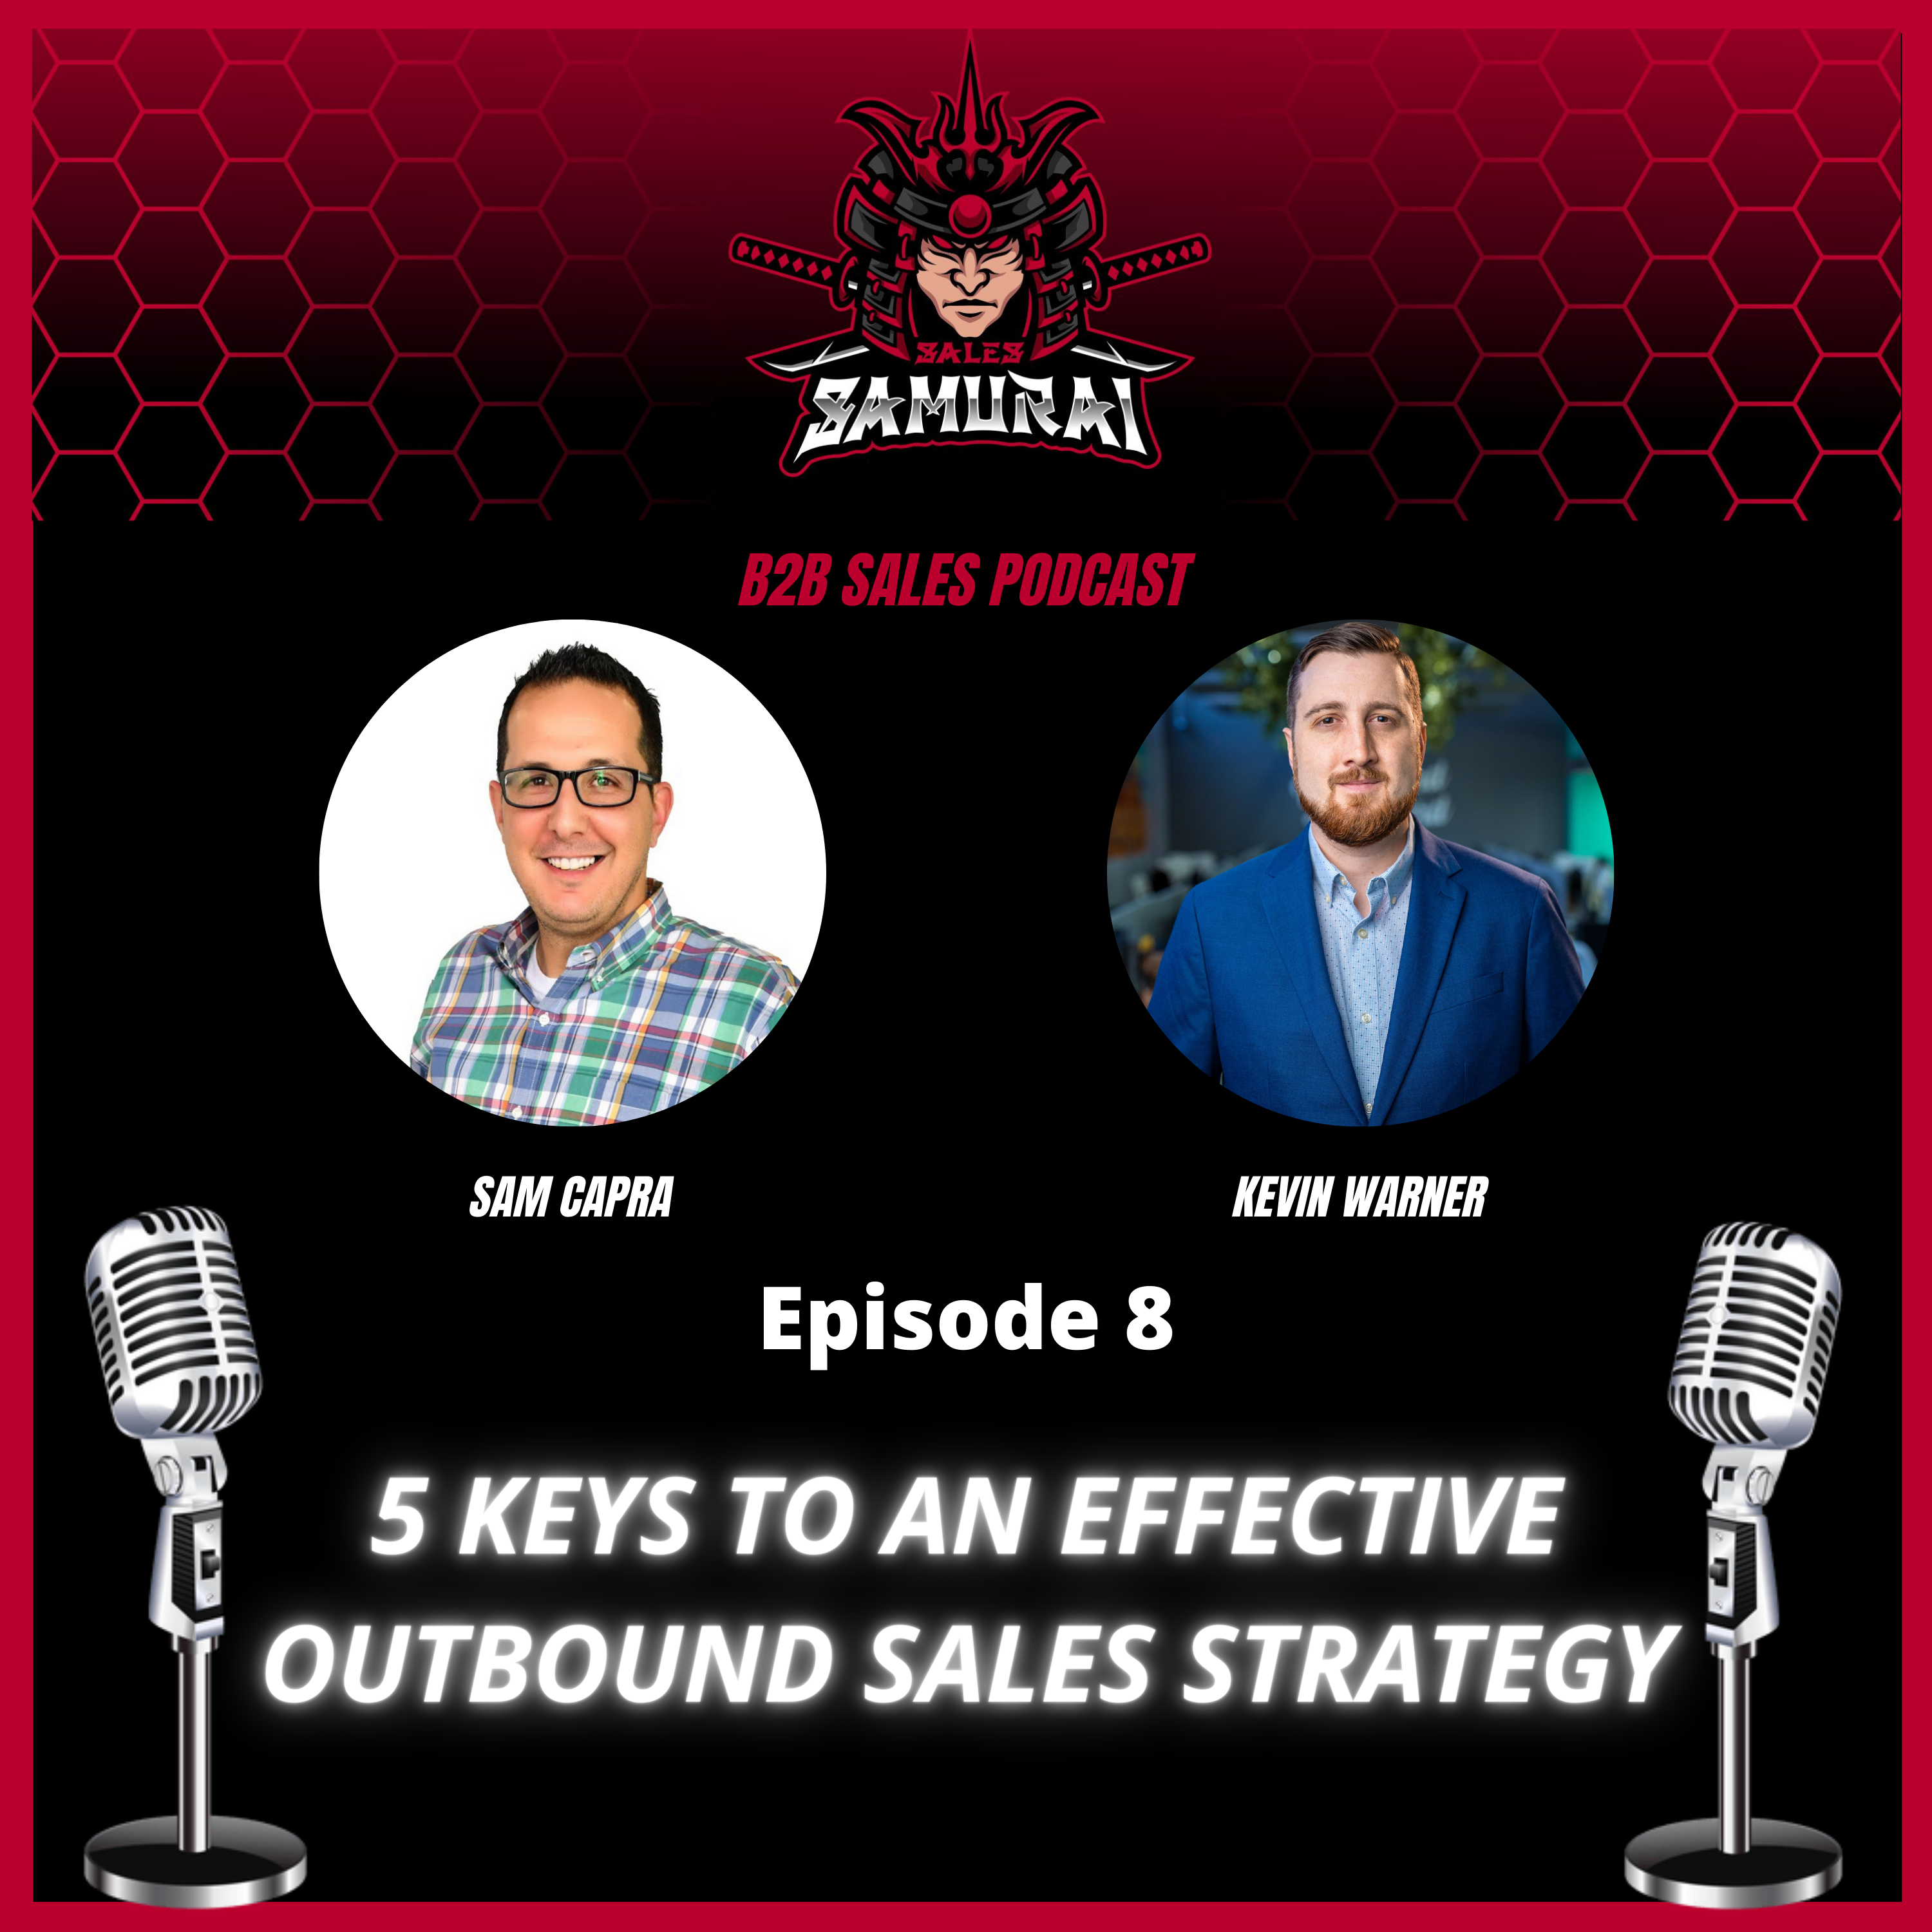 5 Keys to an Effective Outbound Sales Strategy Image